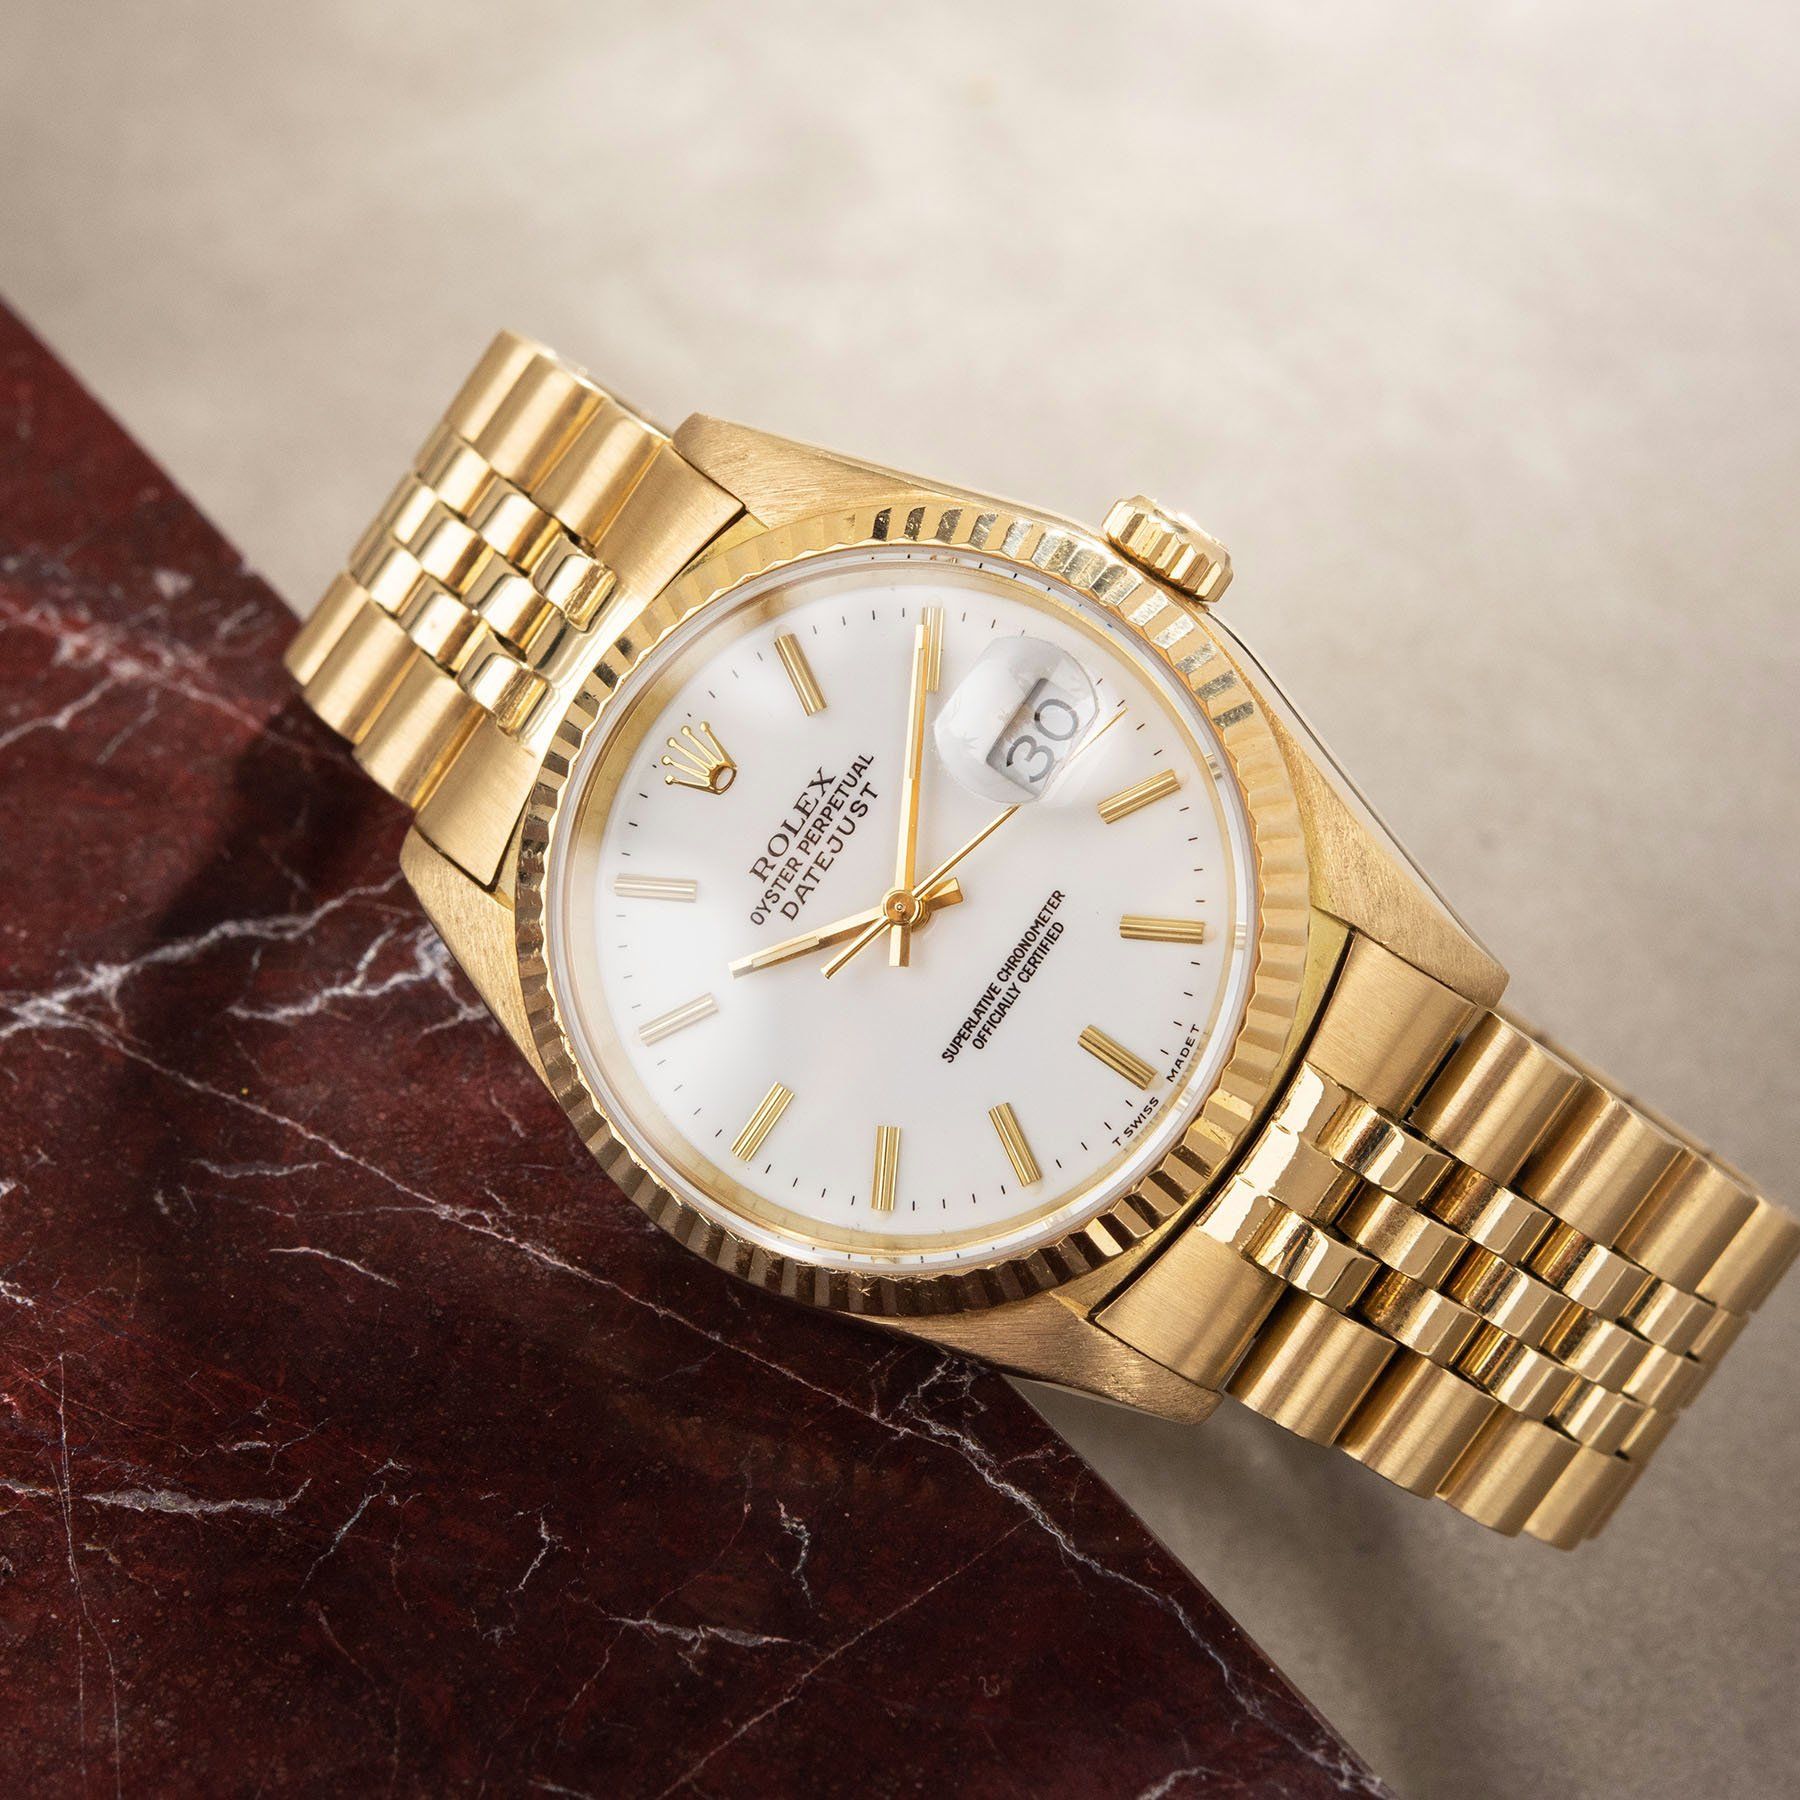 Rolex Datejust Yellow Gold with White Porcelain Dial 16238